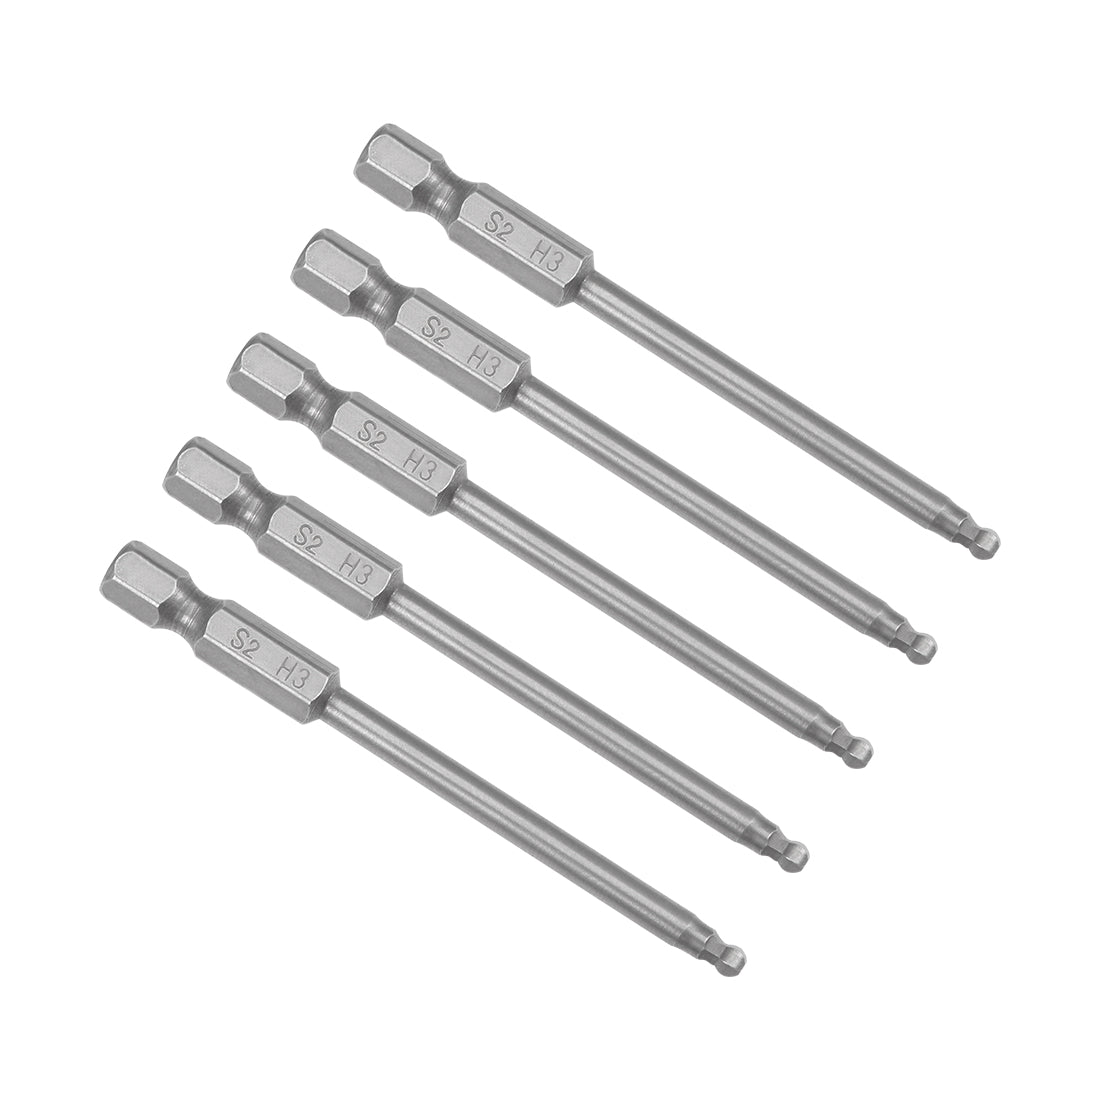 Uxcell Uxcell 5 Pcs H5 (5mm) Ball End Screwdriver Bits, S2 Steel Magnetic 2.95 Inch Long Drill Bit with 1/4 Inch Hex Shank